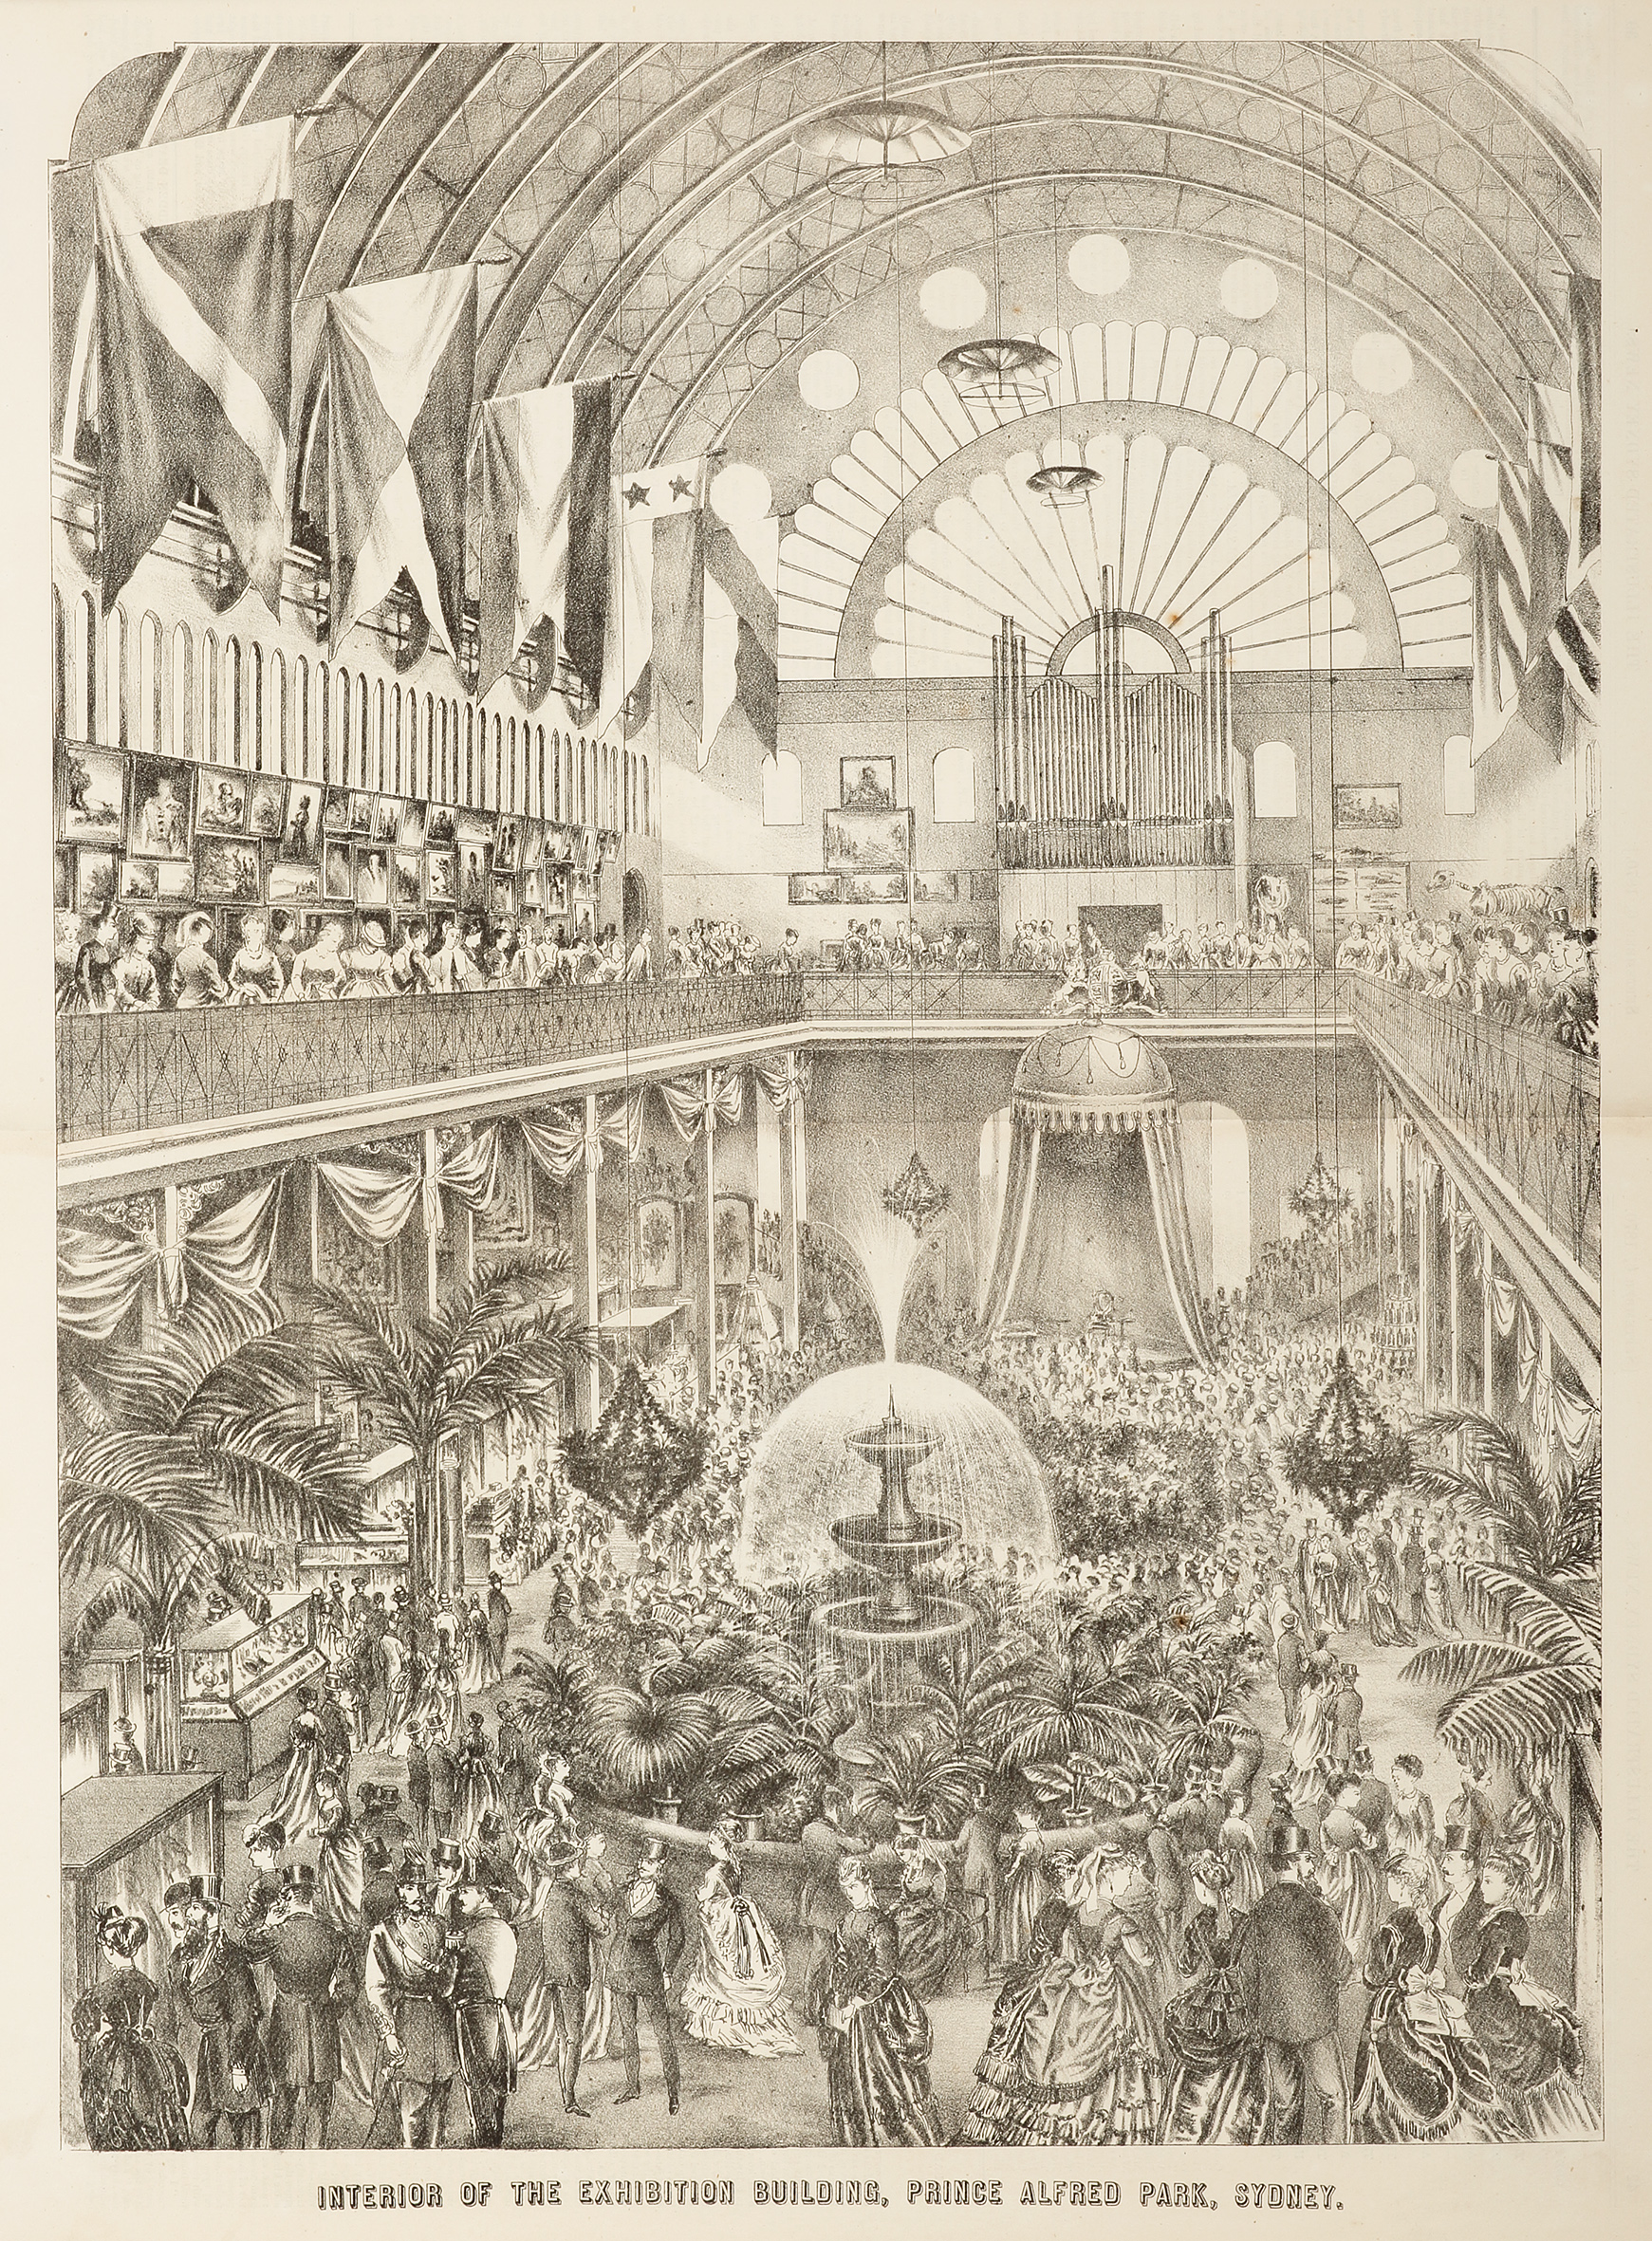 Interior of the Exhibition Building, Prince Alfred Park, Sydney. - Antique Print from 1870